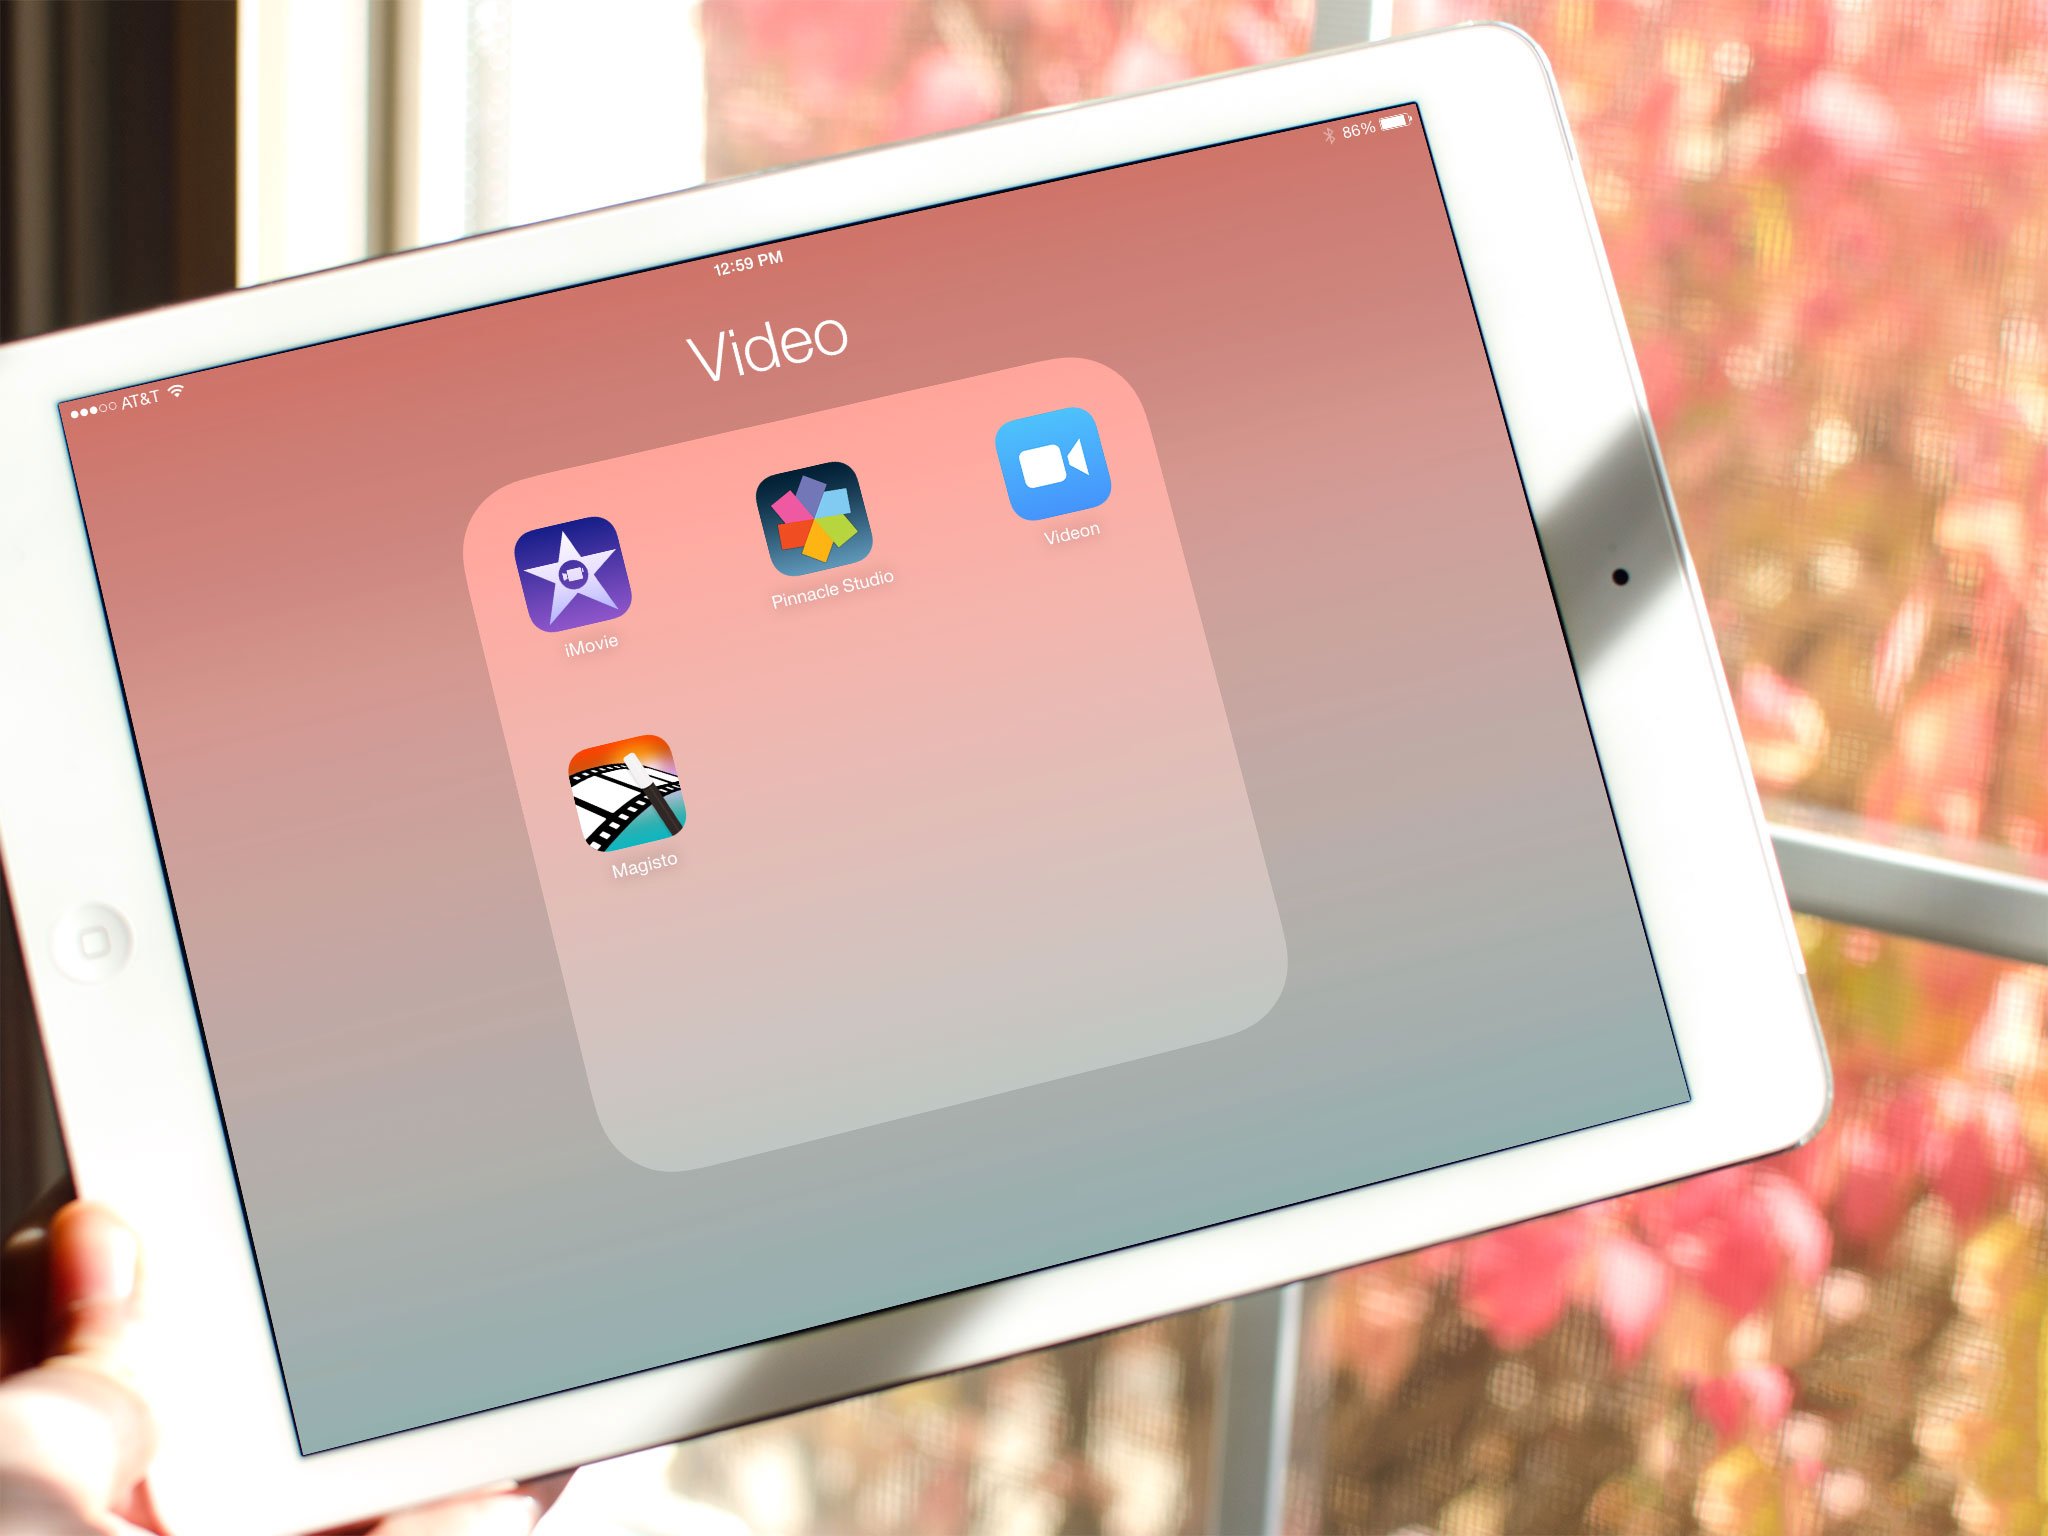 Best video editing apps for iPad: iMovie, Pinnacle Studio, Videon, and more!